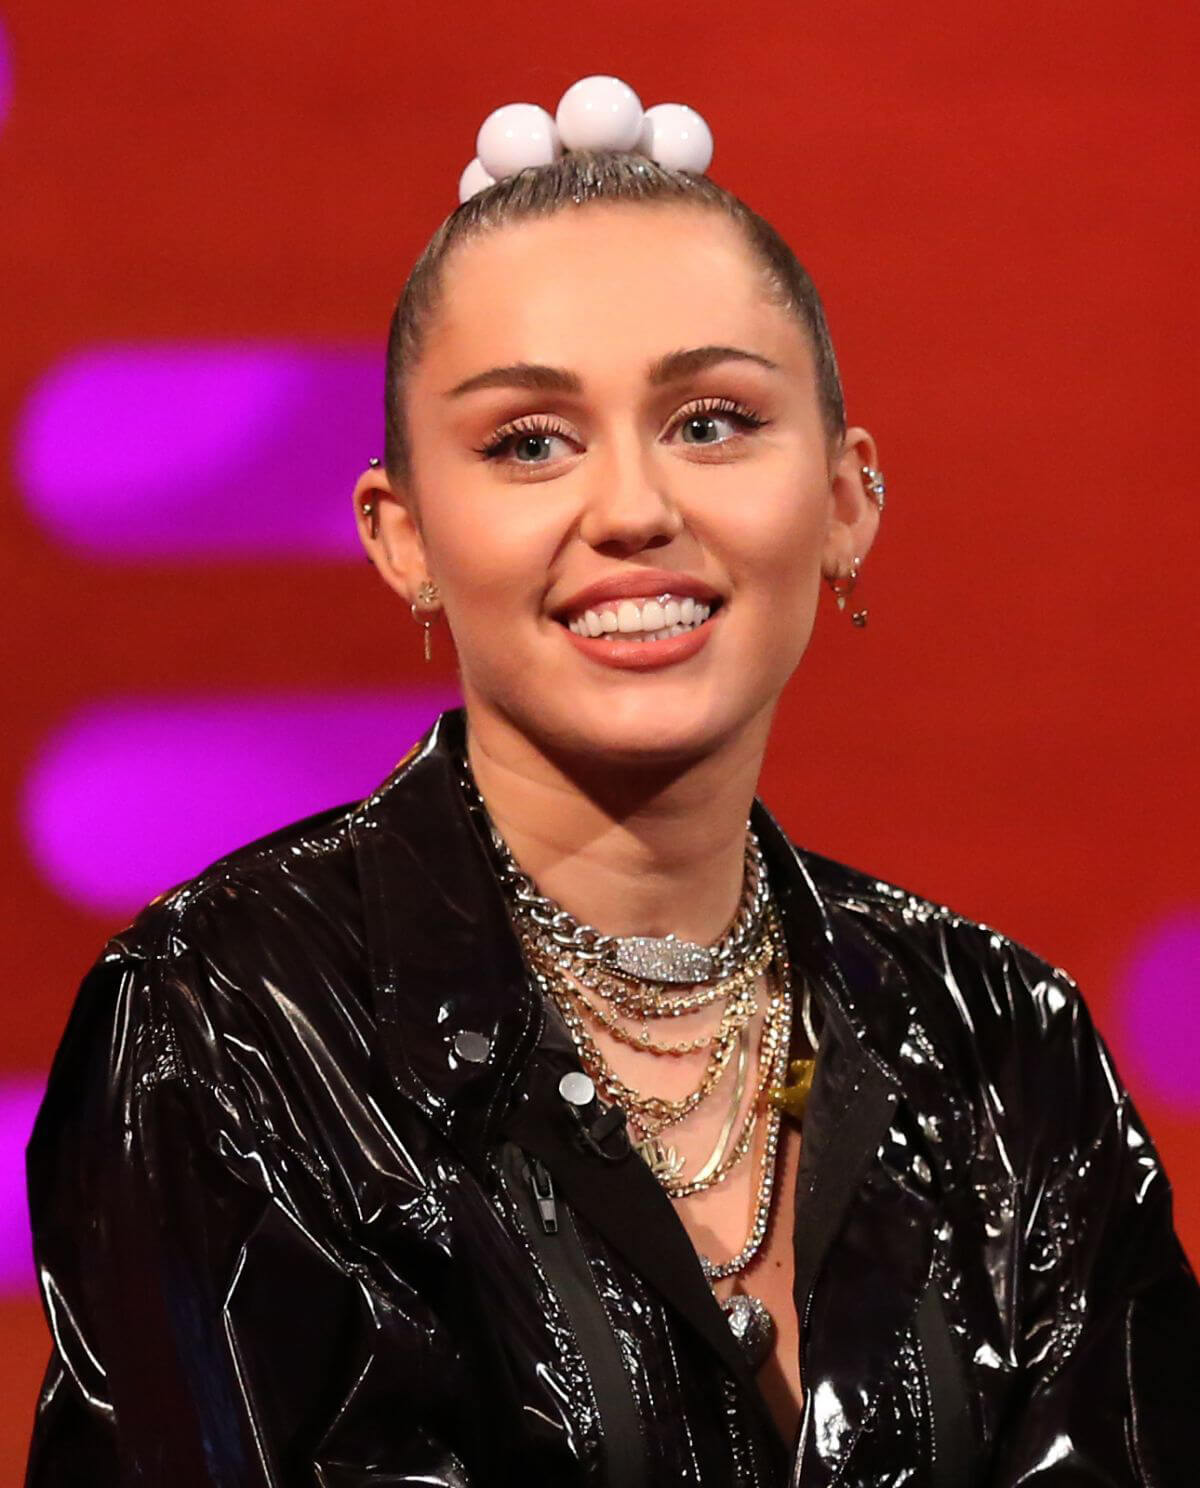 Miley Cyrus at Graham Norton Show in London 2018/12/06